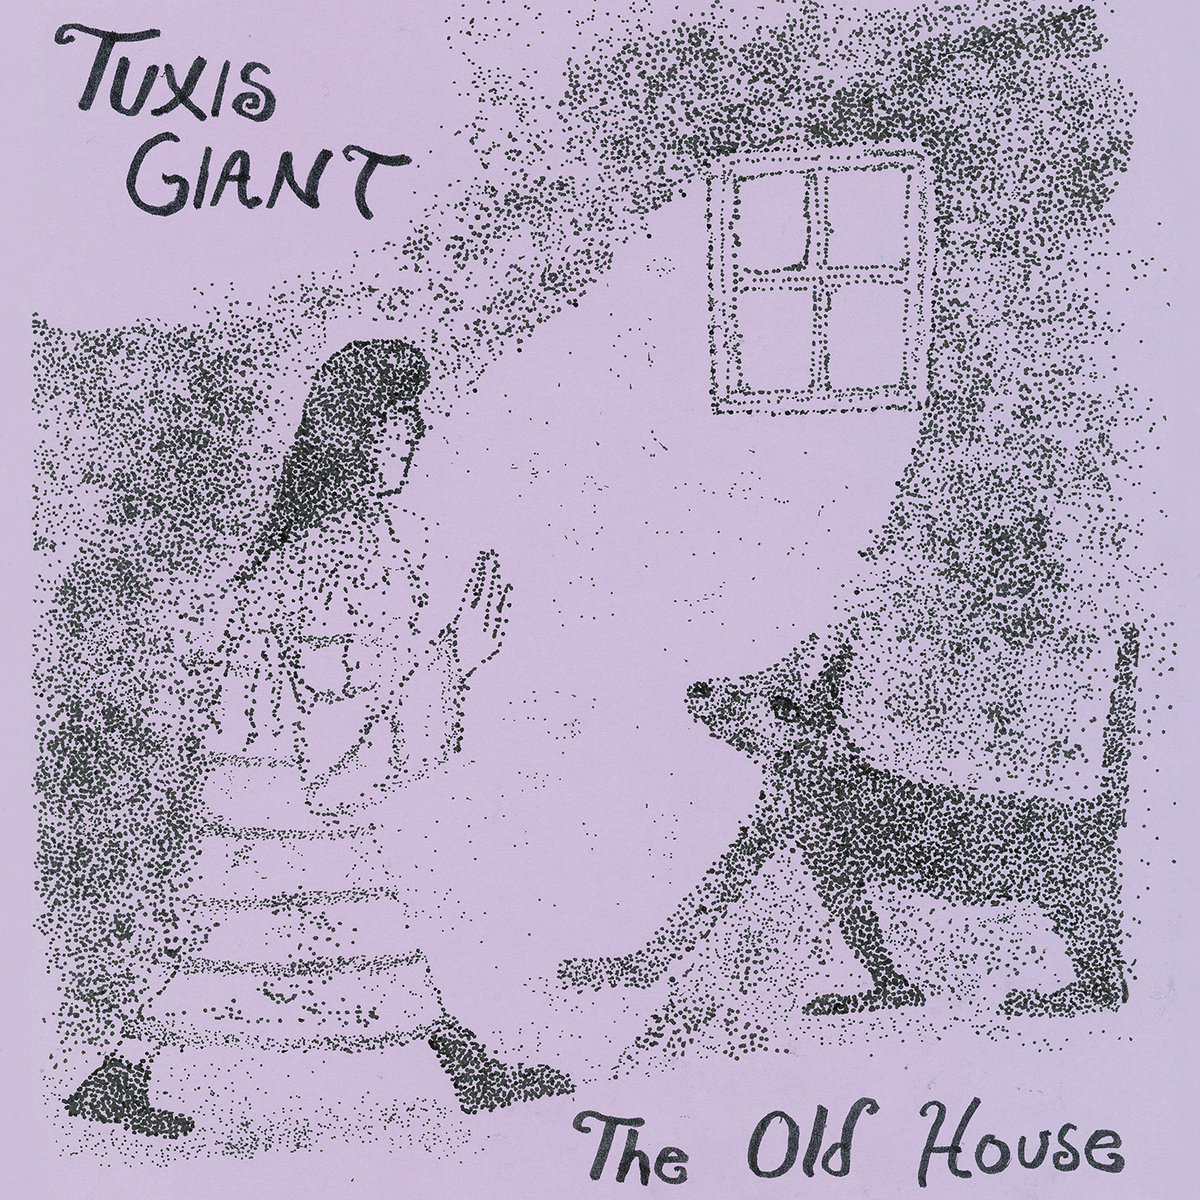 Artwork for The Old House by Tuxis Giant